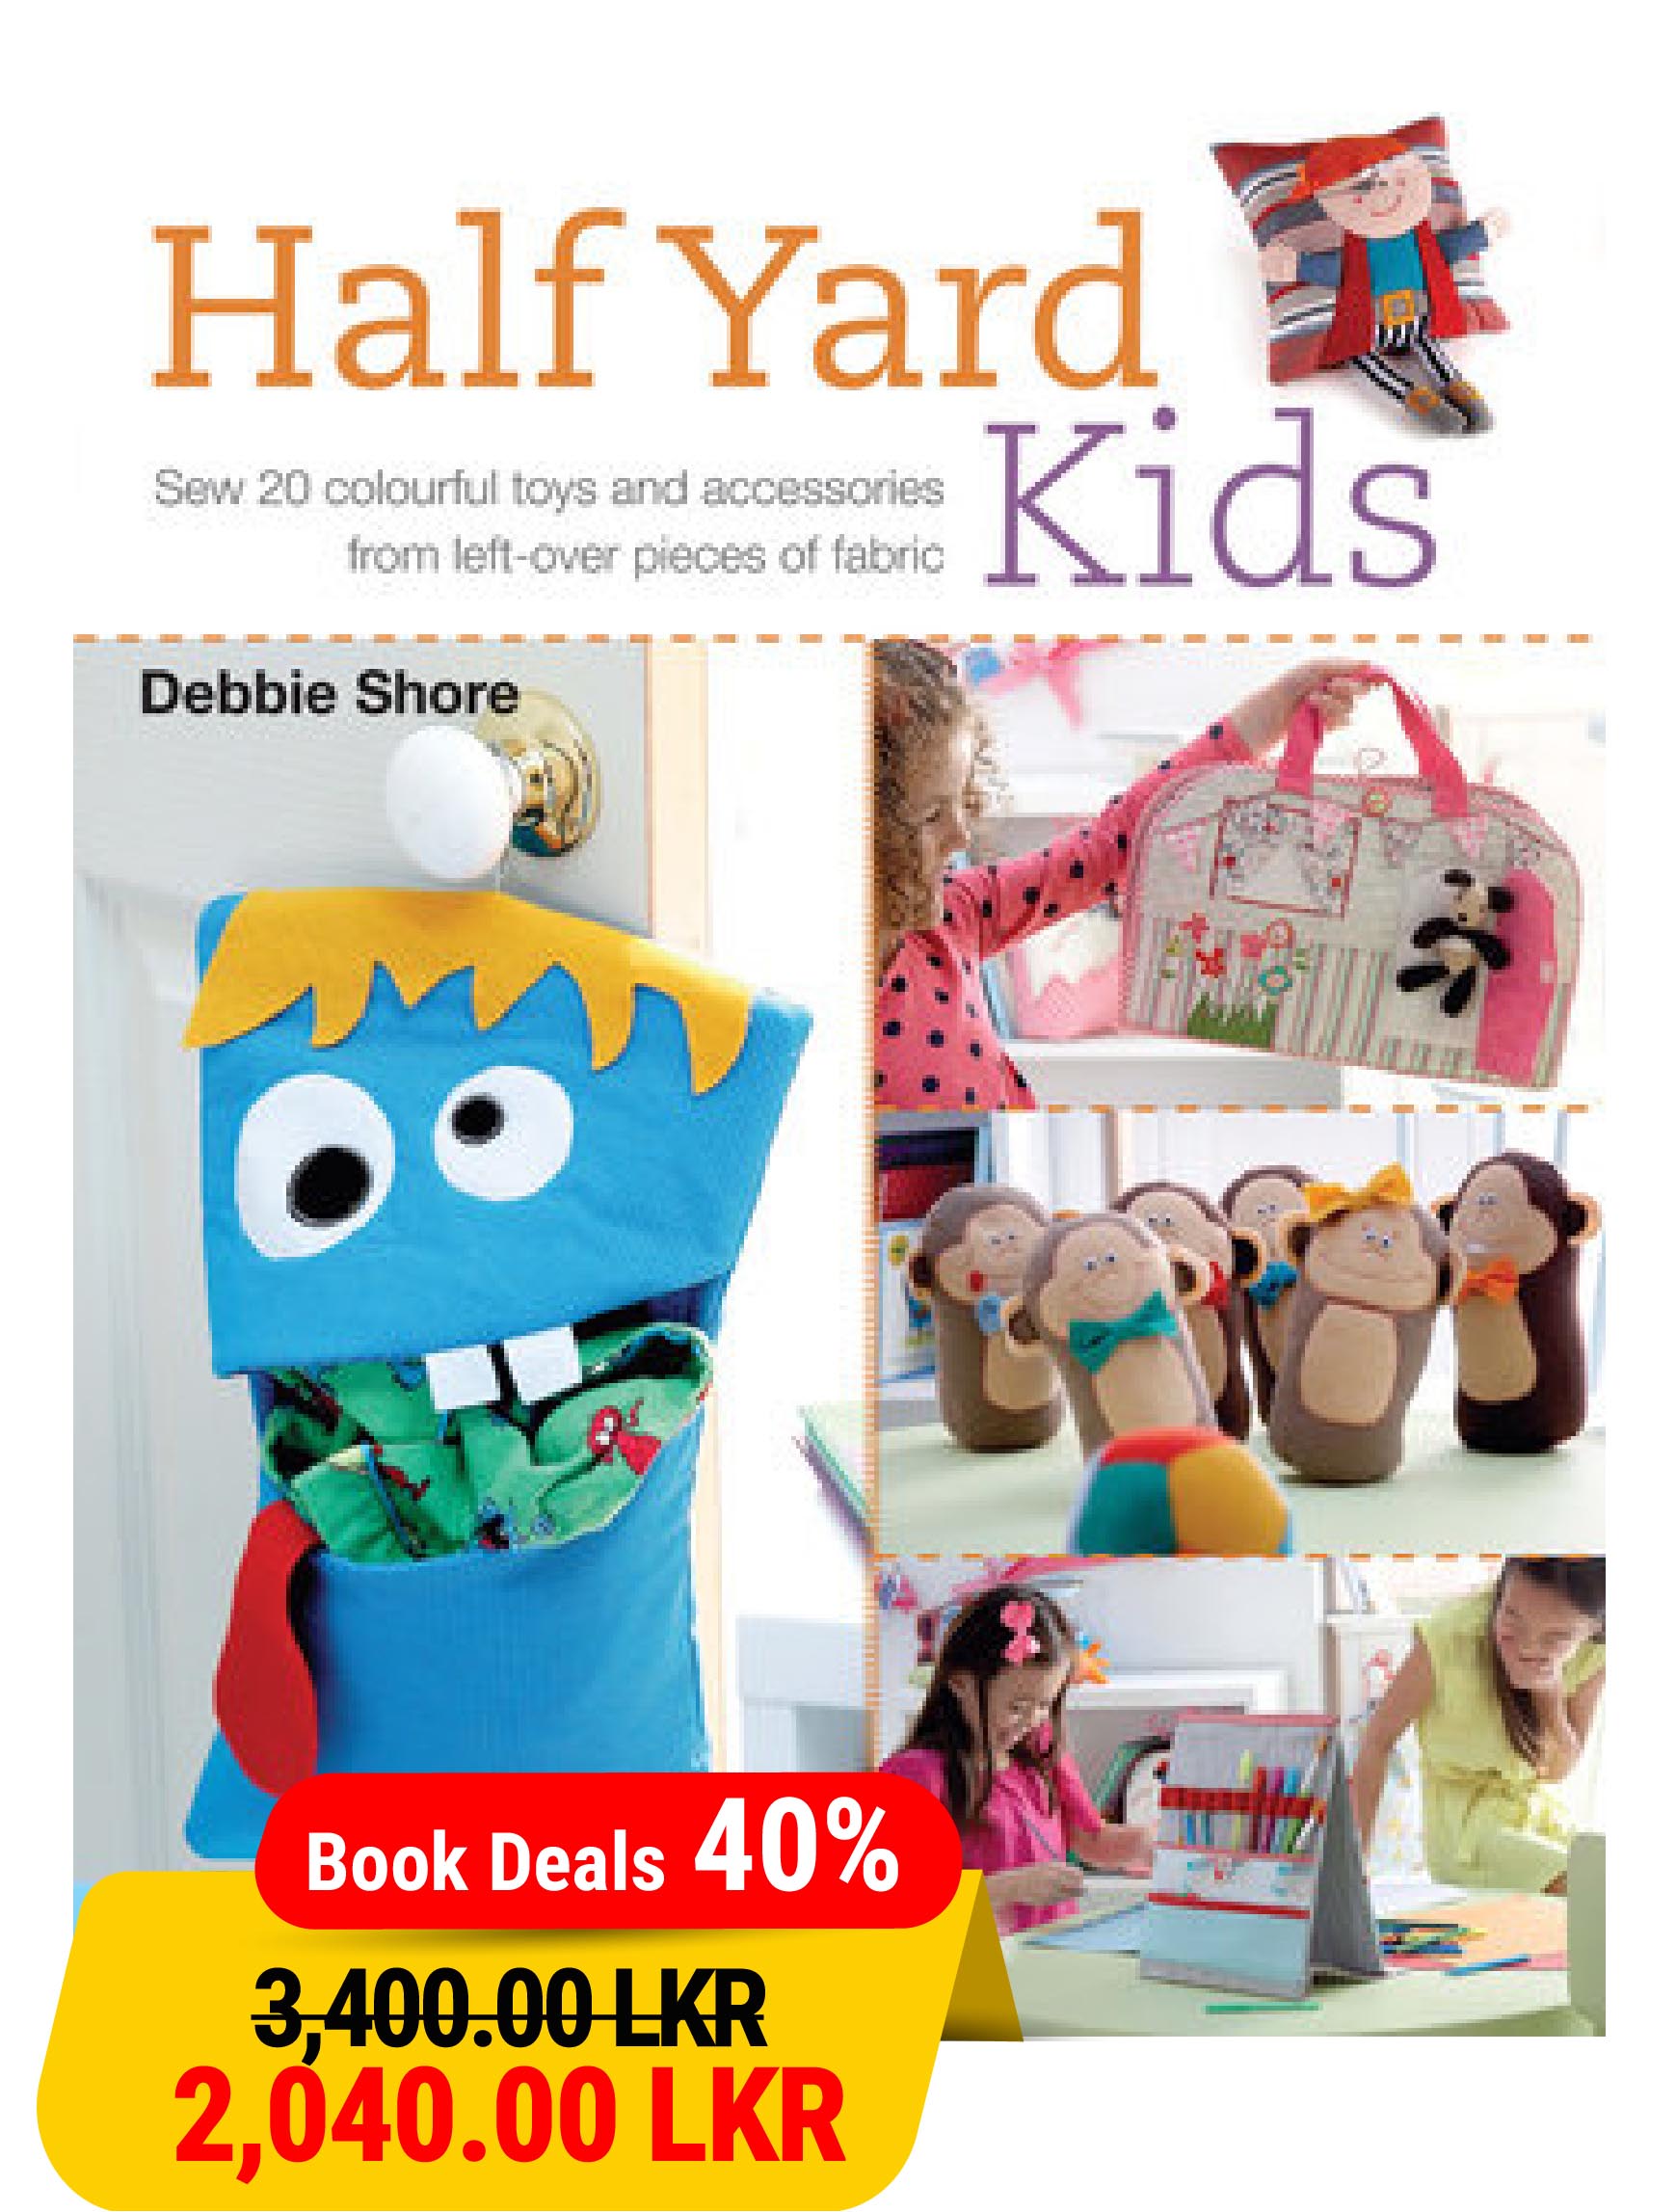 Half Yard# Kids: Sew 20 colourful toys and accessories from leftover pieces of fabric